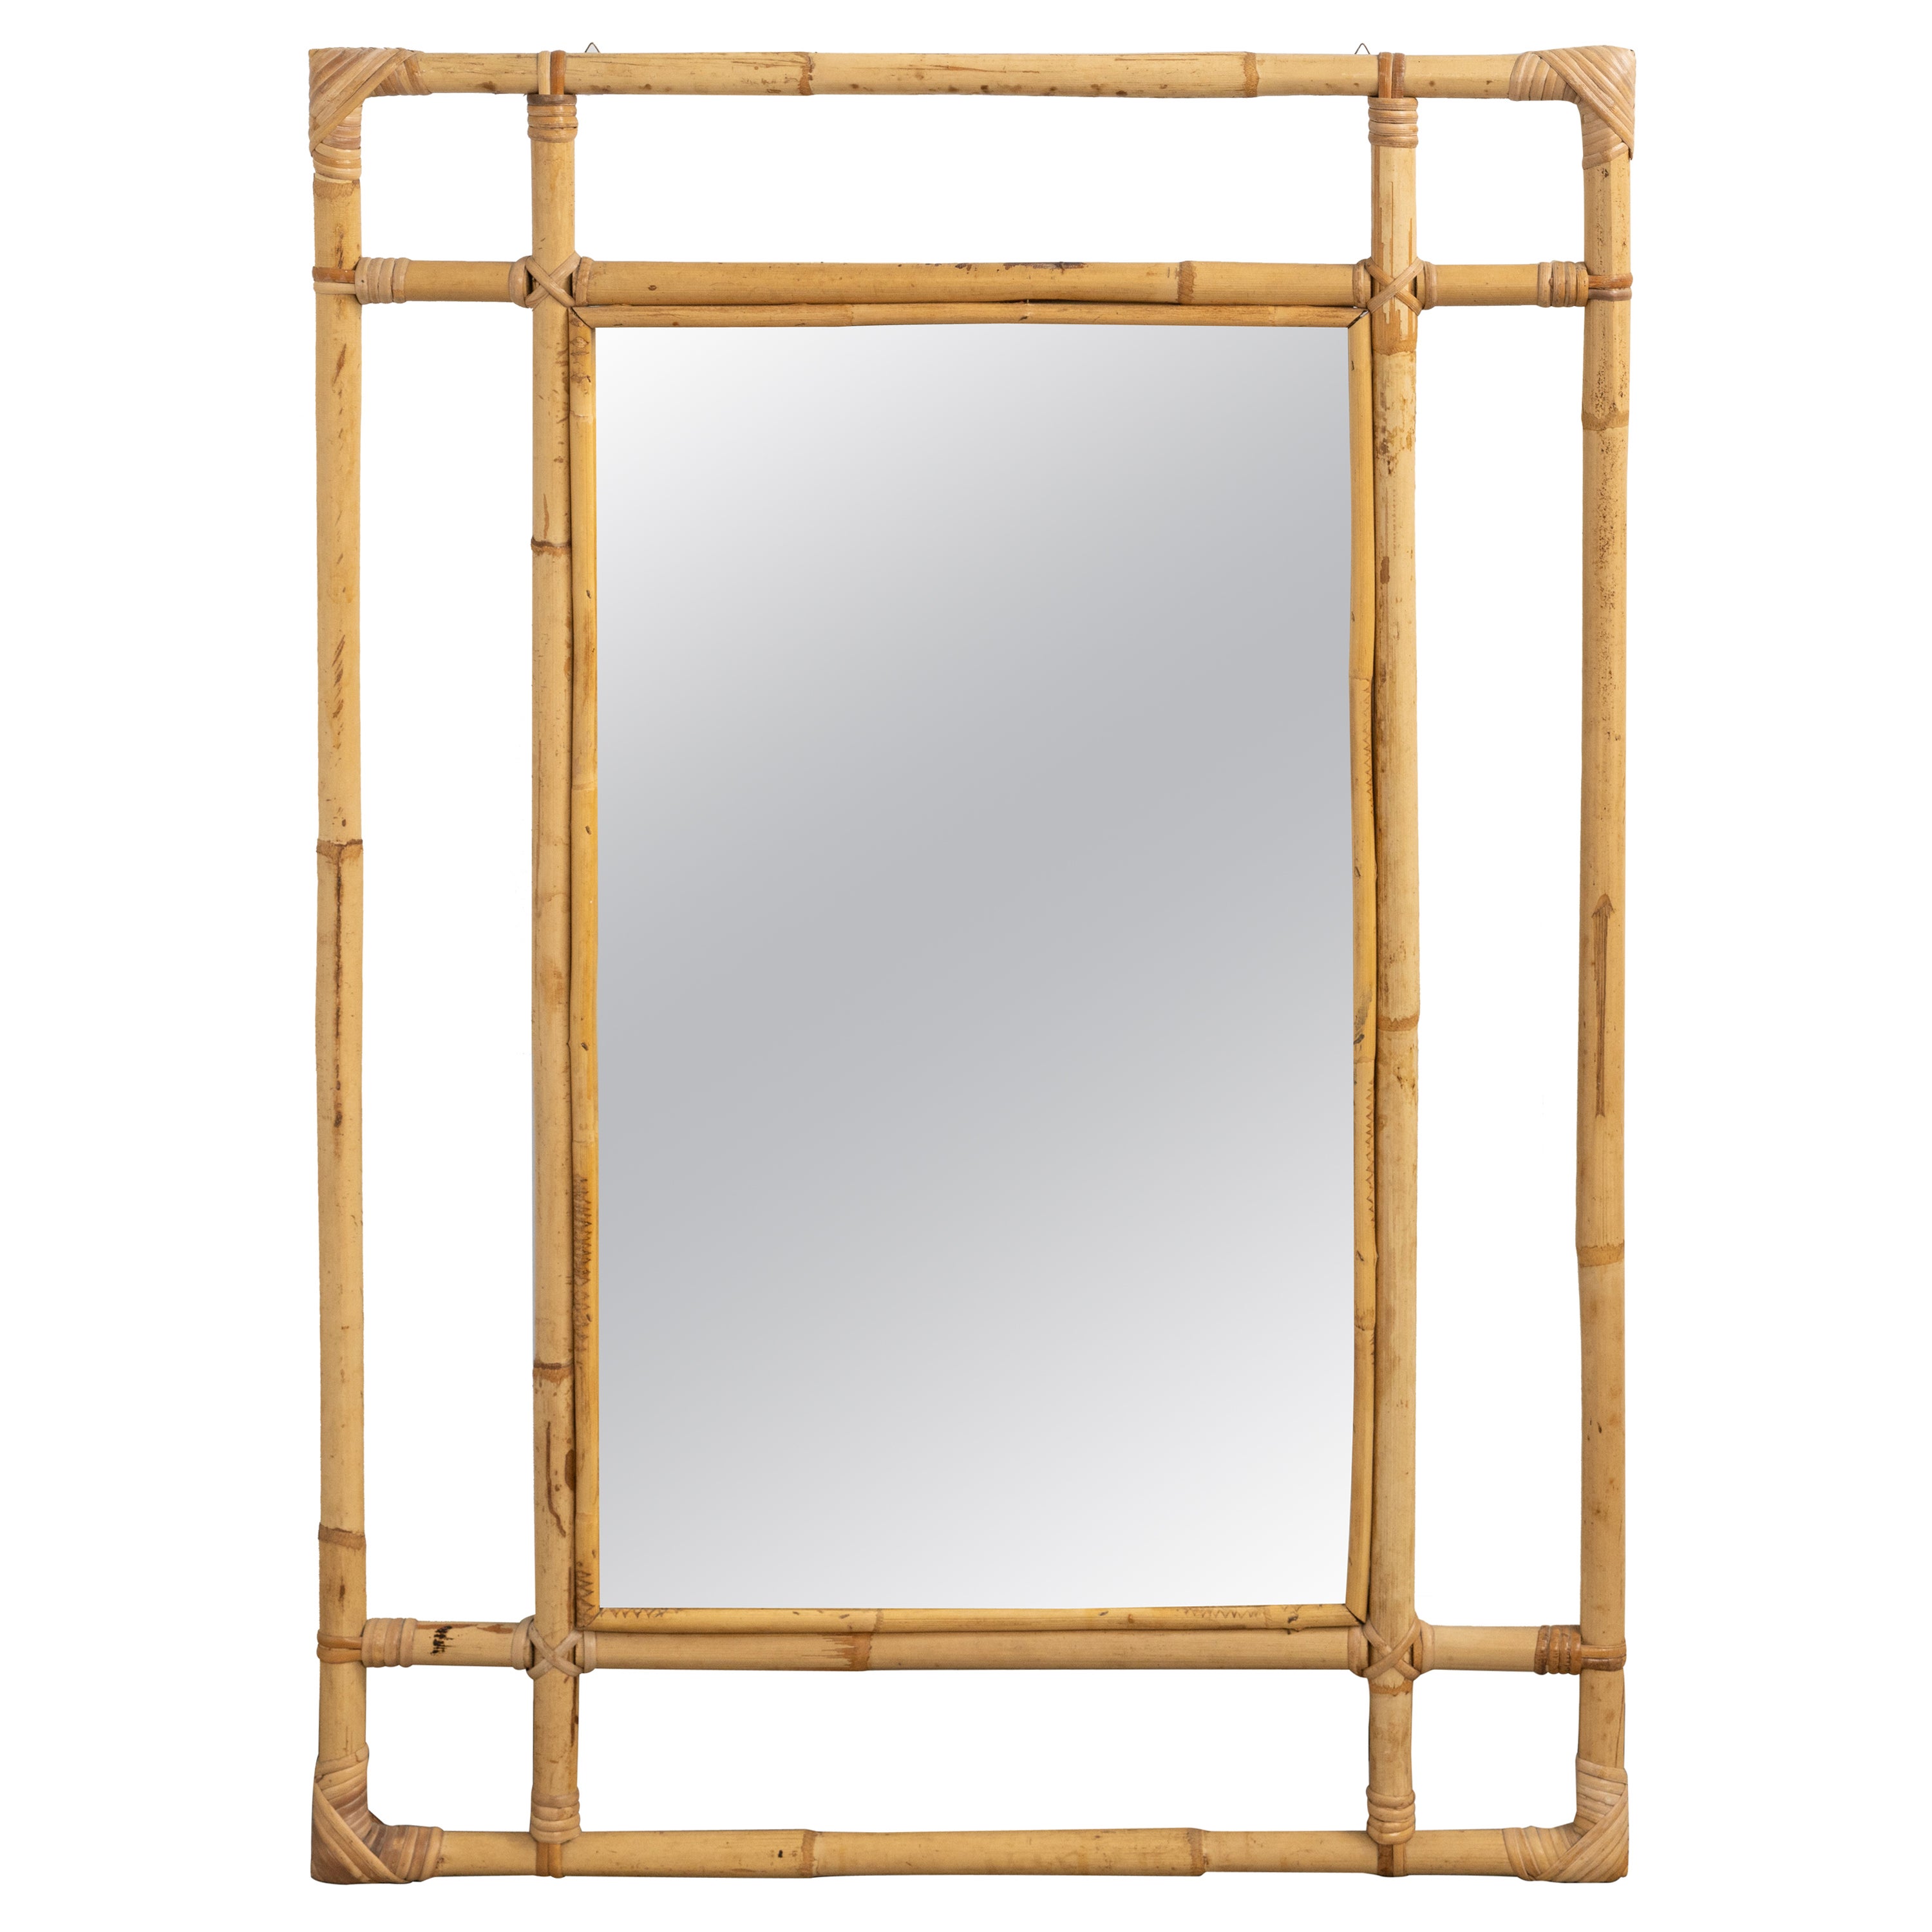 Midcentury Bamboo and Rattan Rectangular Wall Mirror, Italy 1970s For Sale